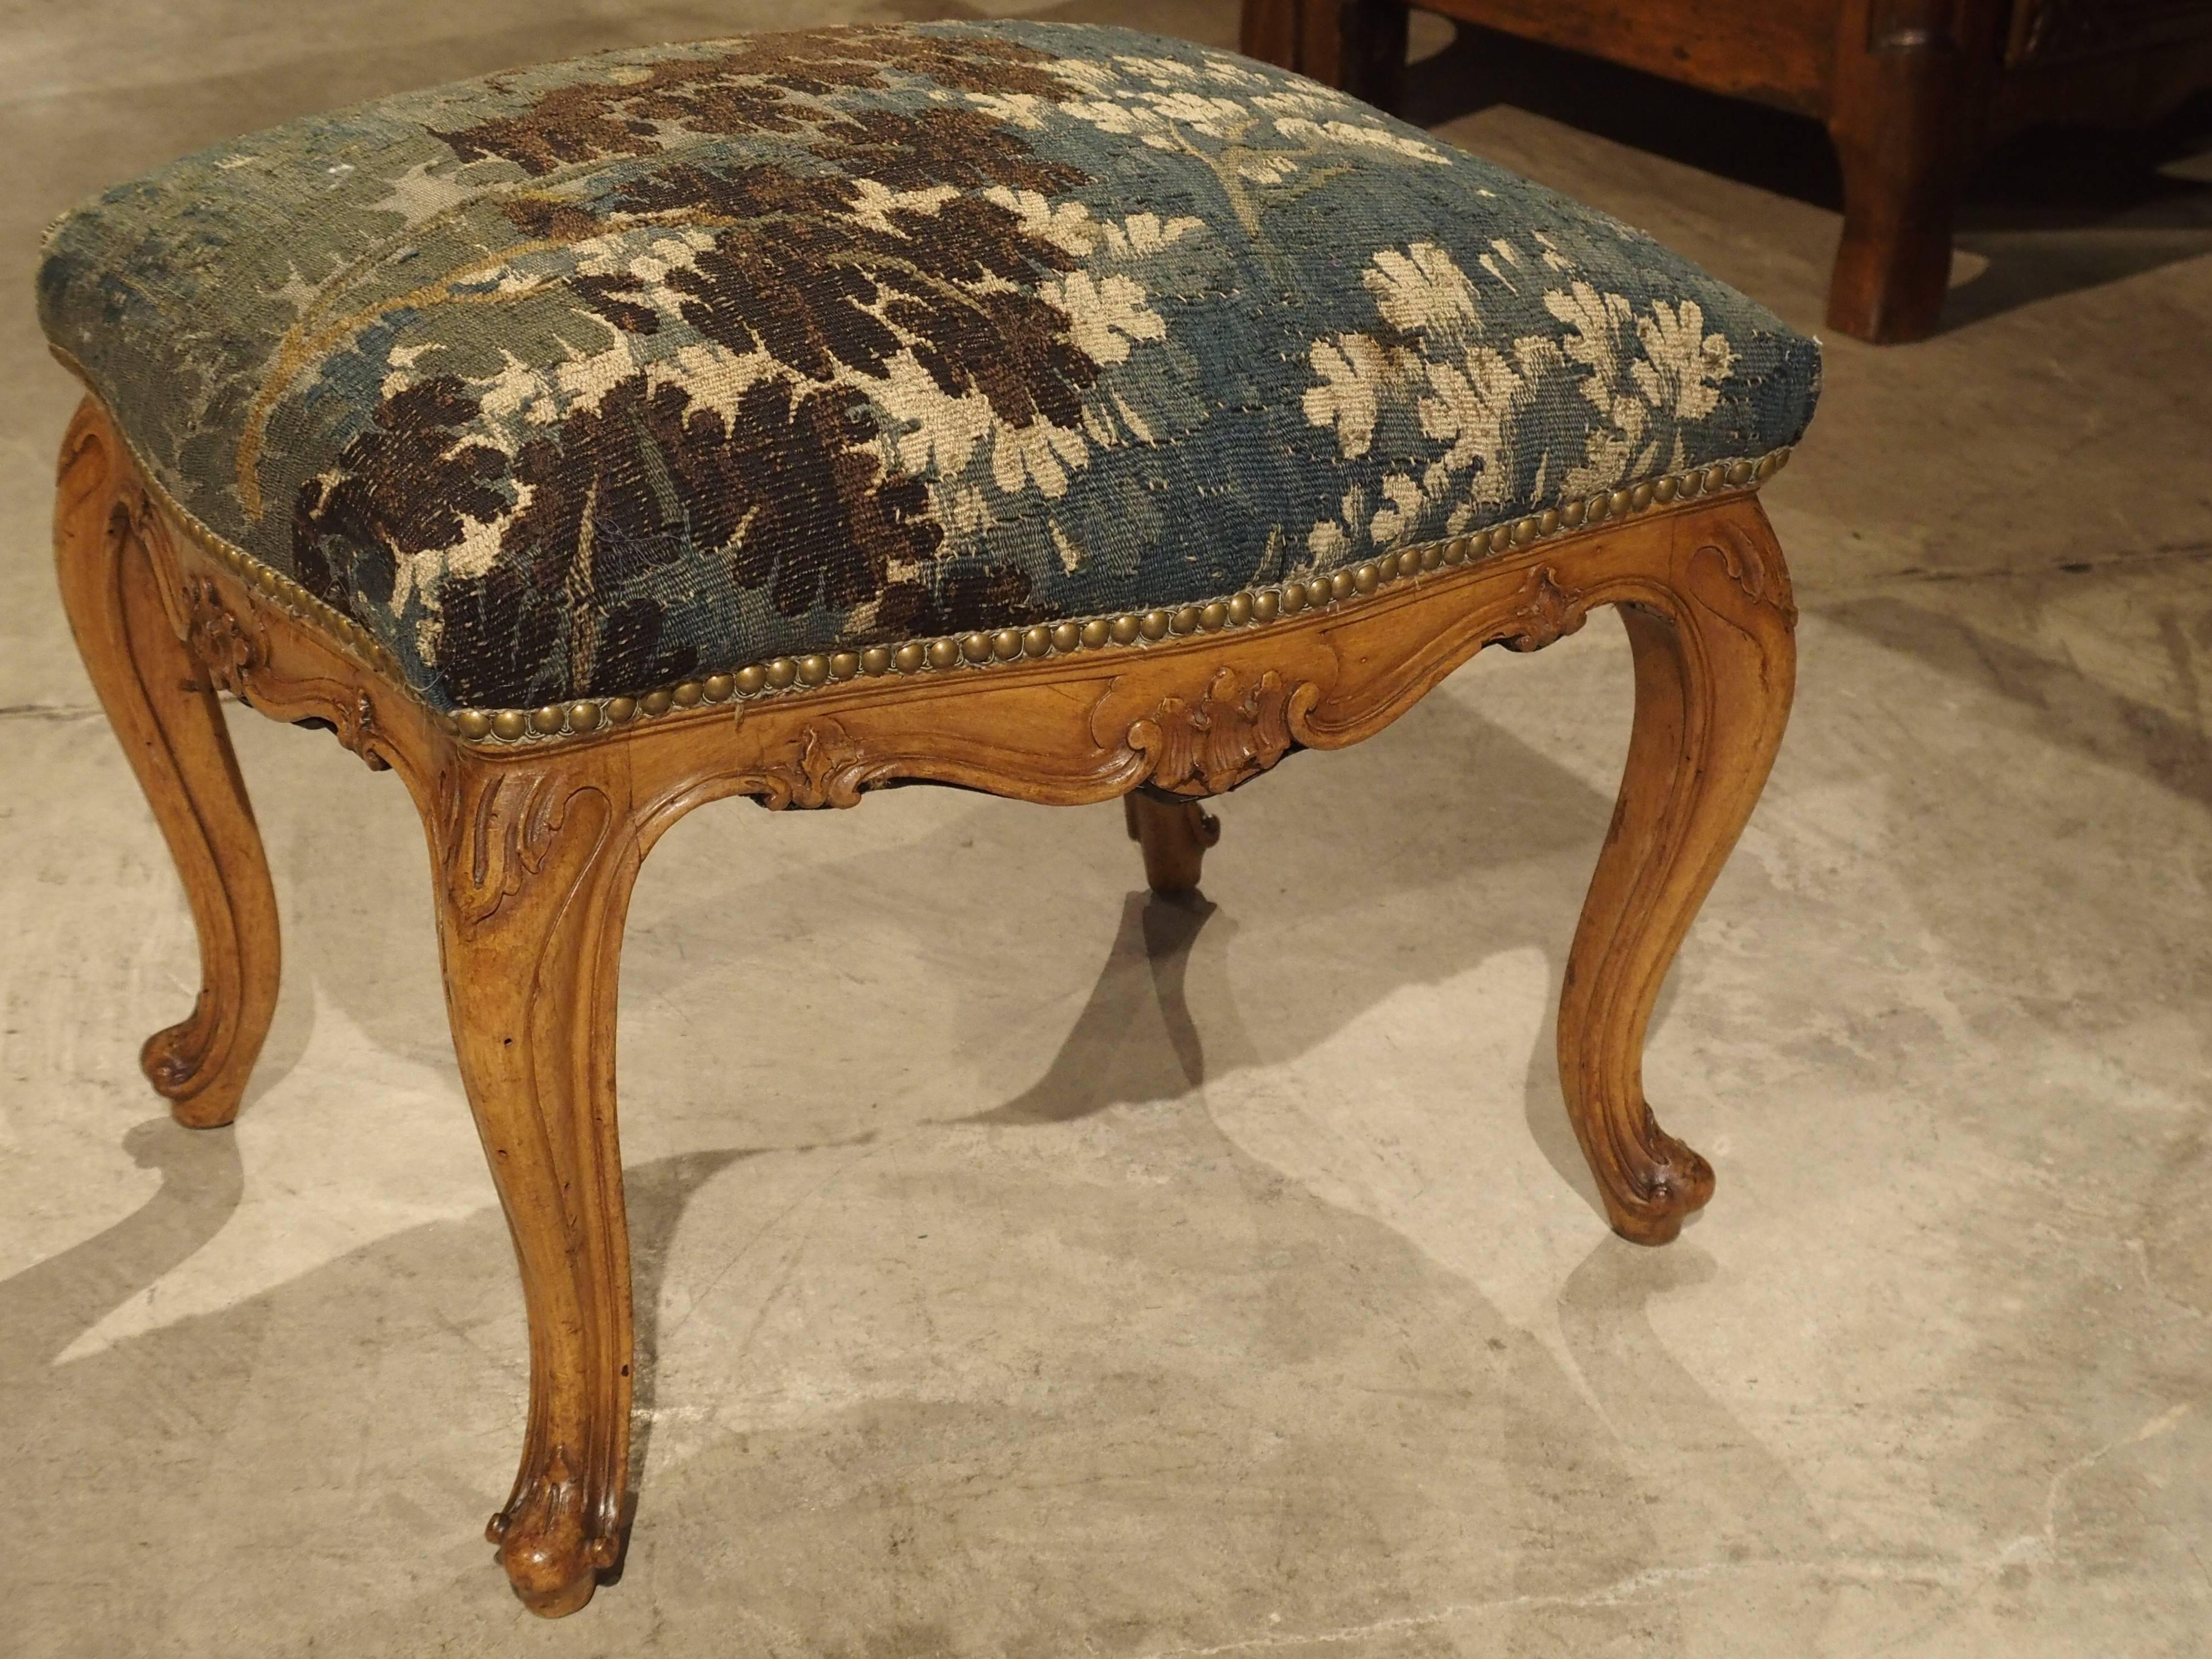 This elegant pair of Venetian walnut wood stools dates to the 19th century (tapestry is 18th century). The carving of these stools is very fine and has a variety of foliate motifs. There are double C and S scroll linear moldings, while graceful